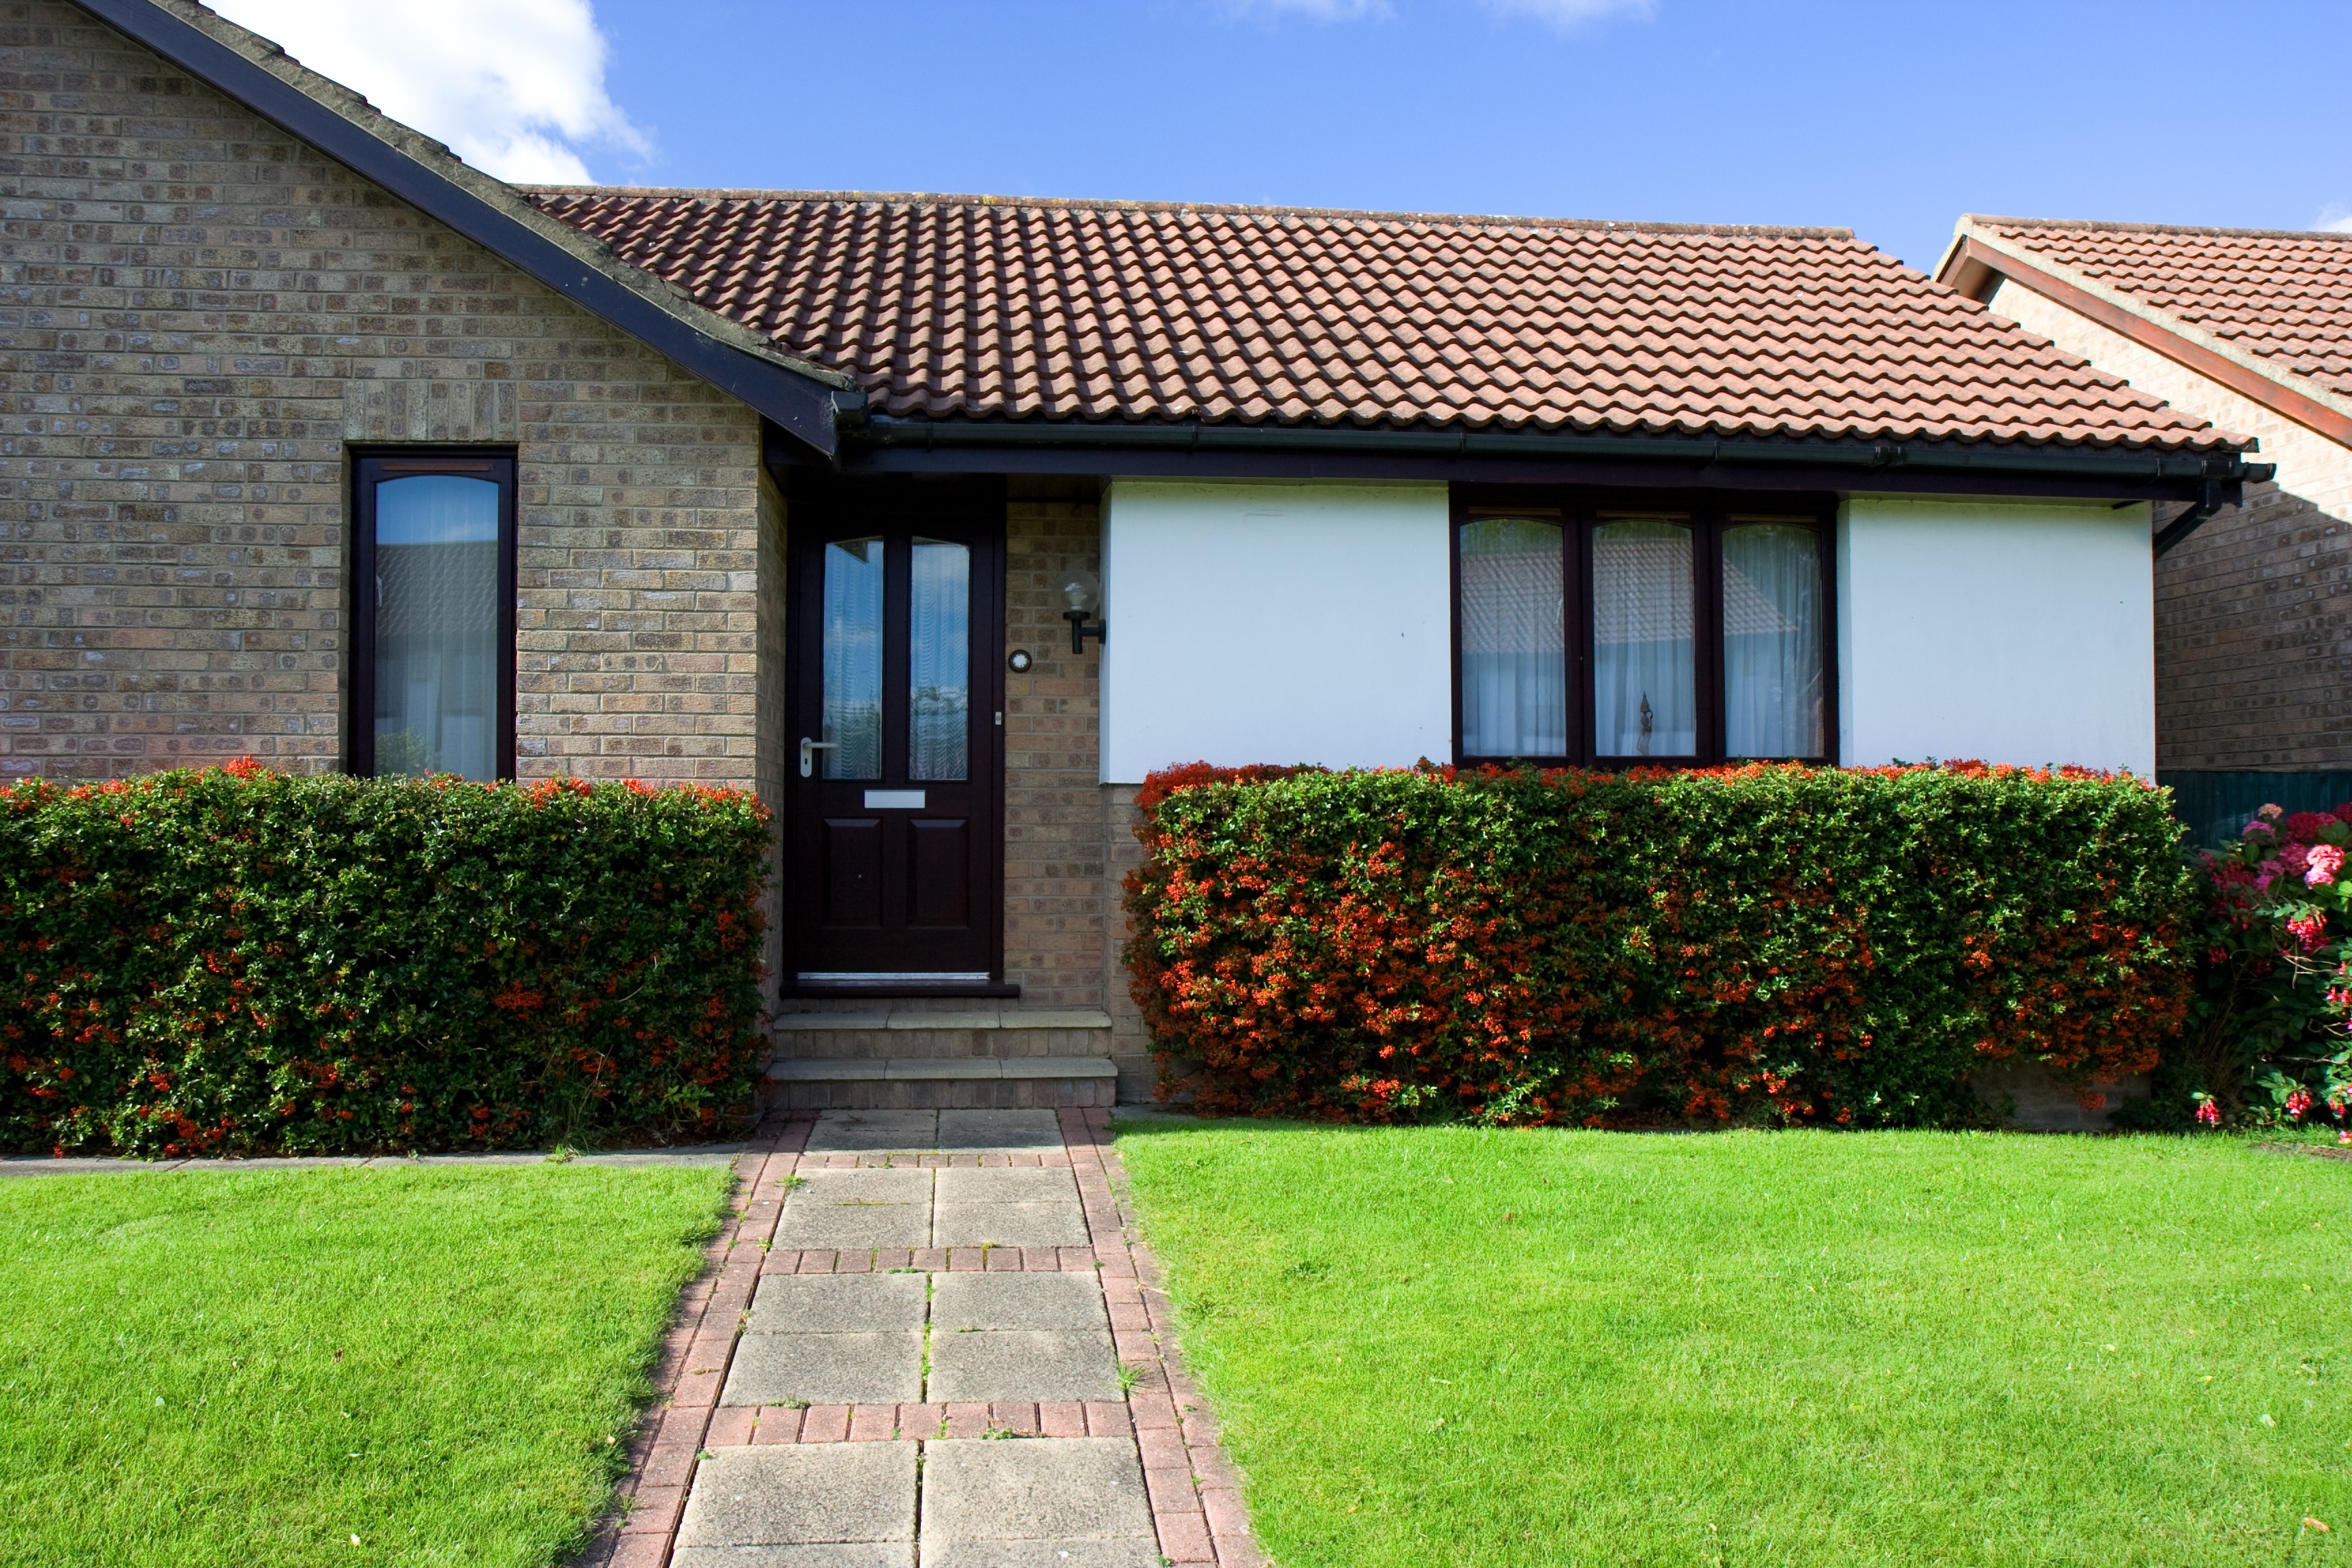 Well maintained bungalow with neatly trimmed hedge and lawn